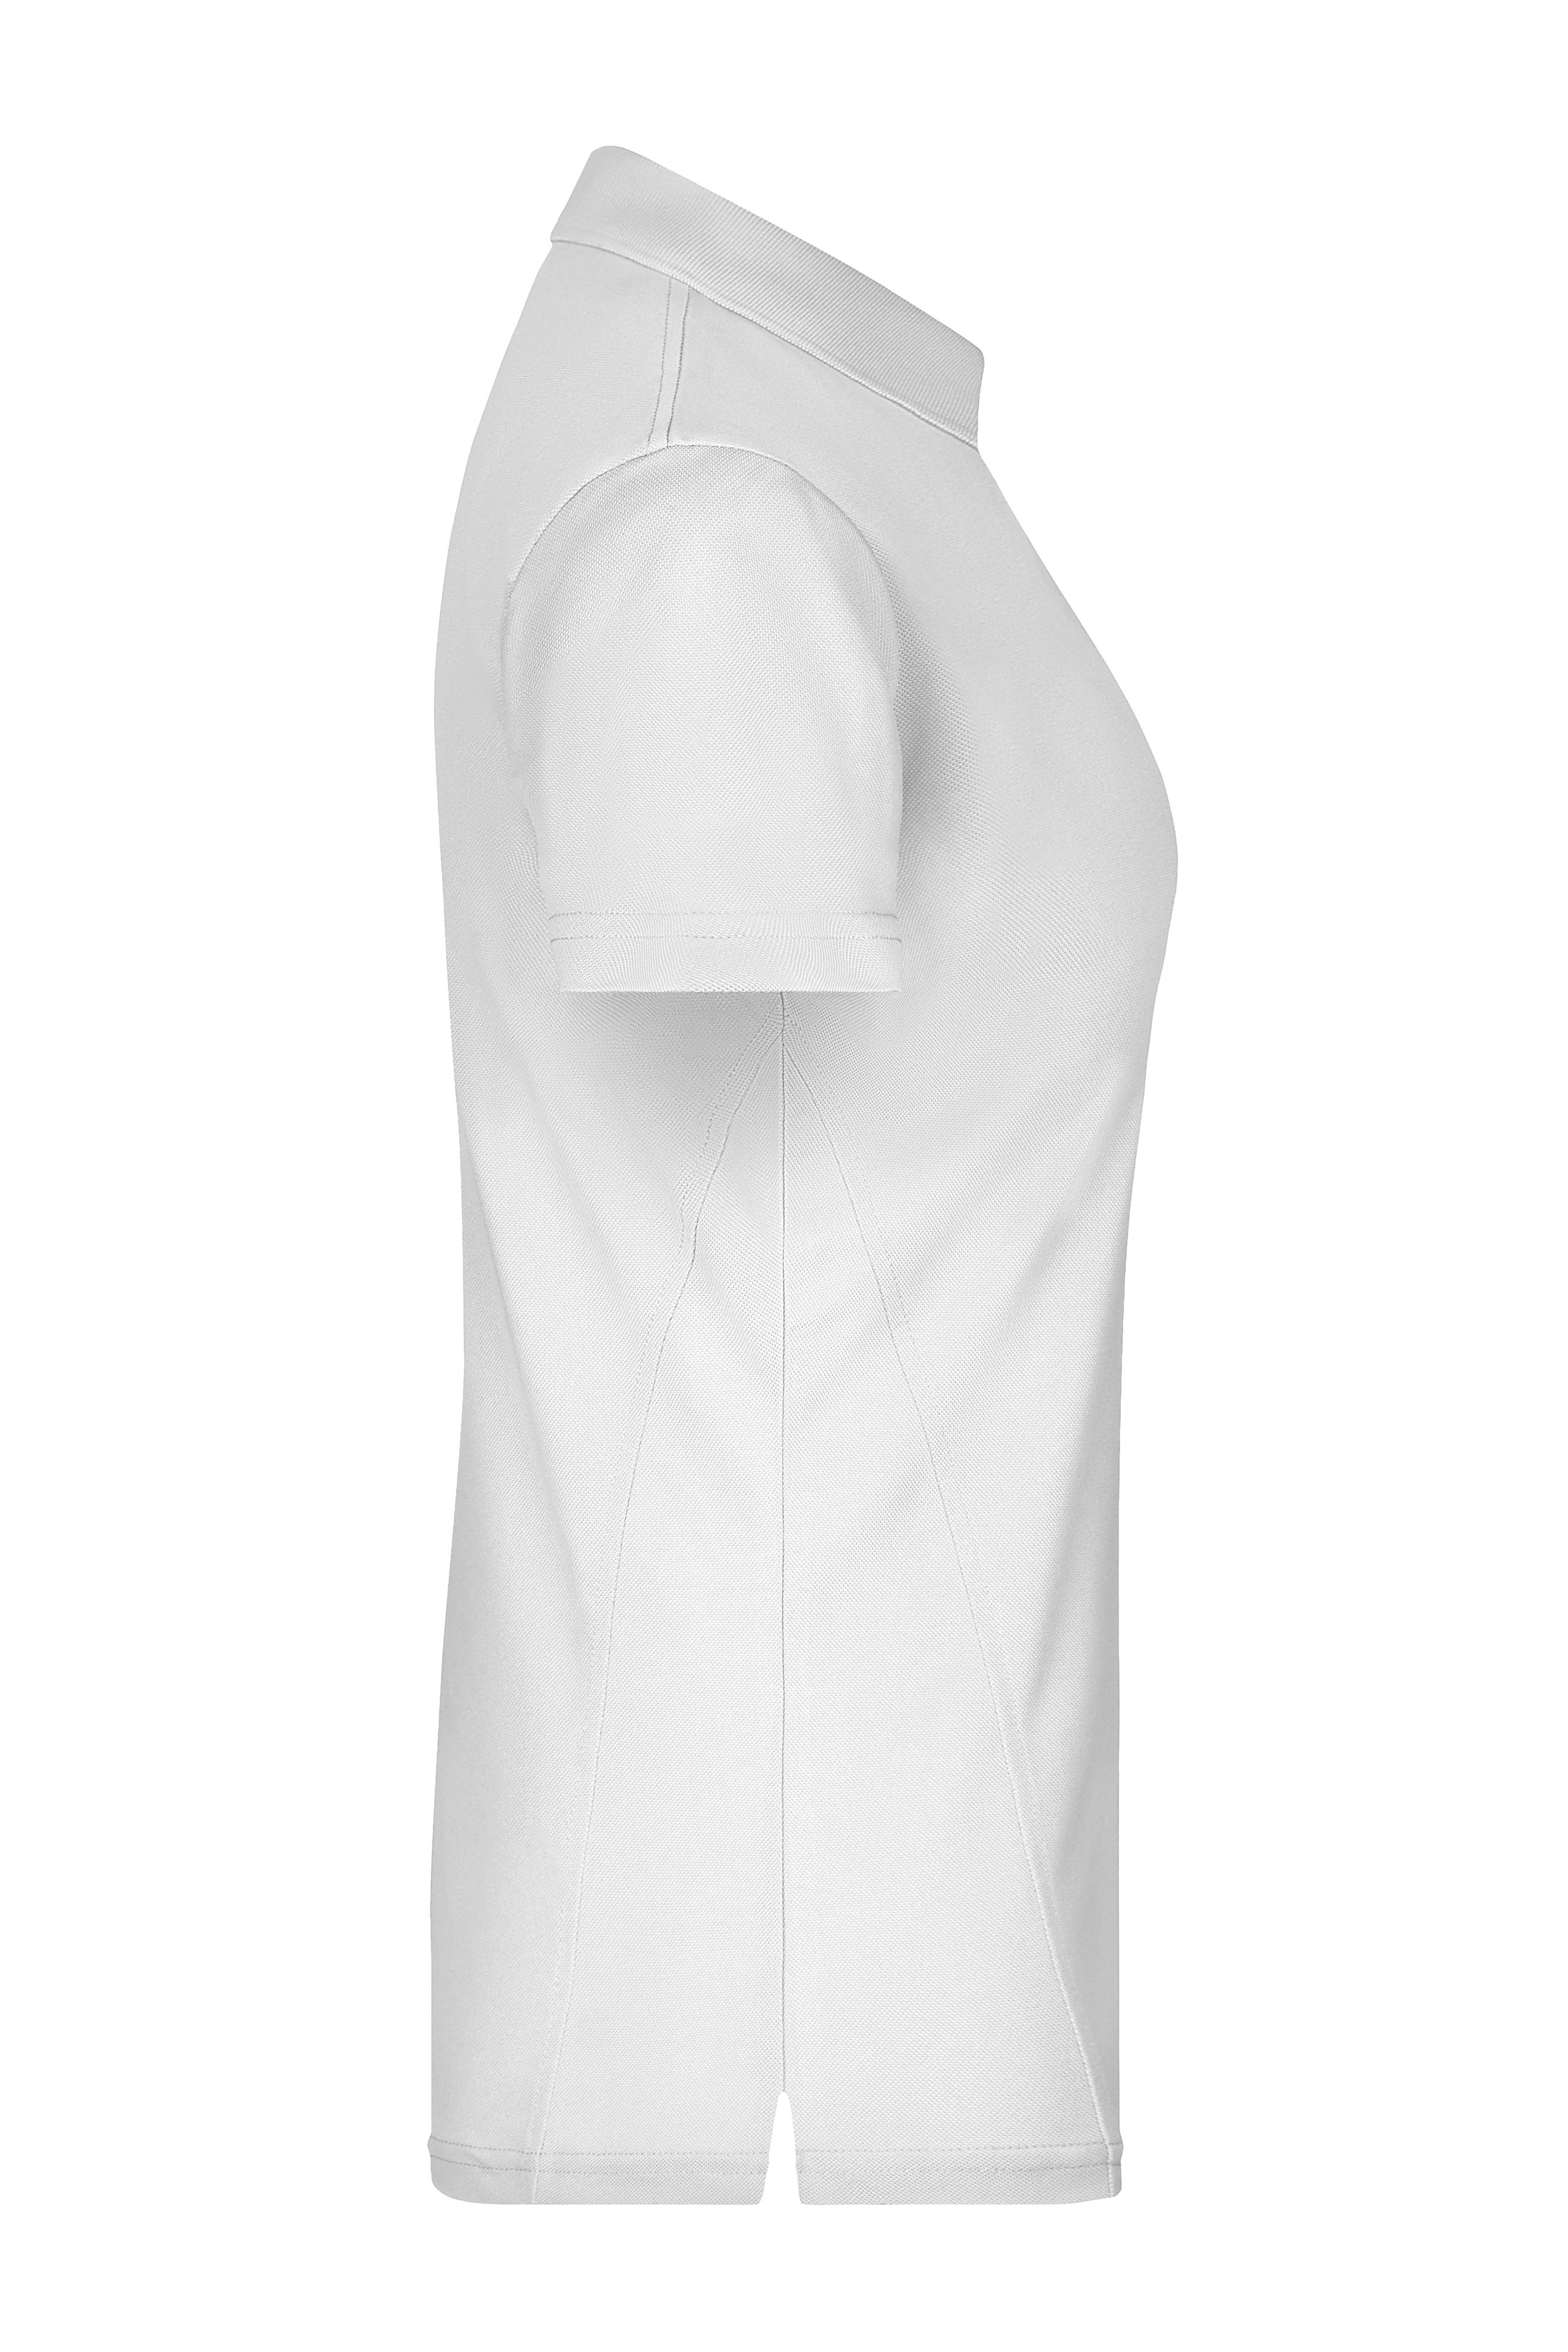 Ladies' Polo High Performance JN411 Funktionspolo